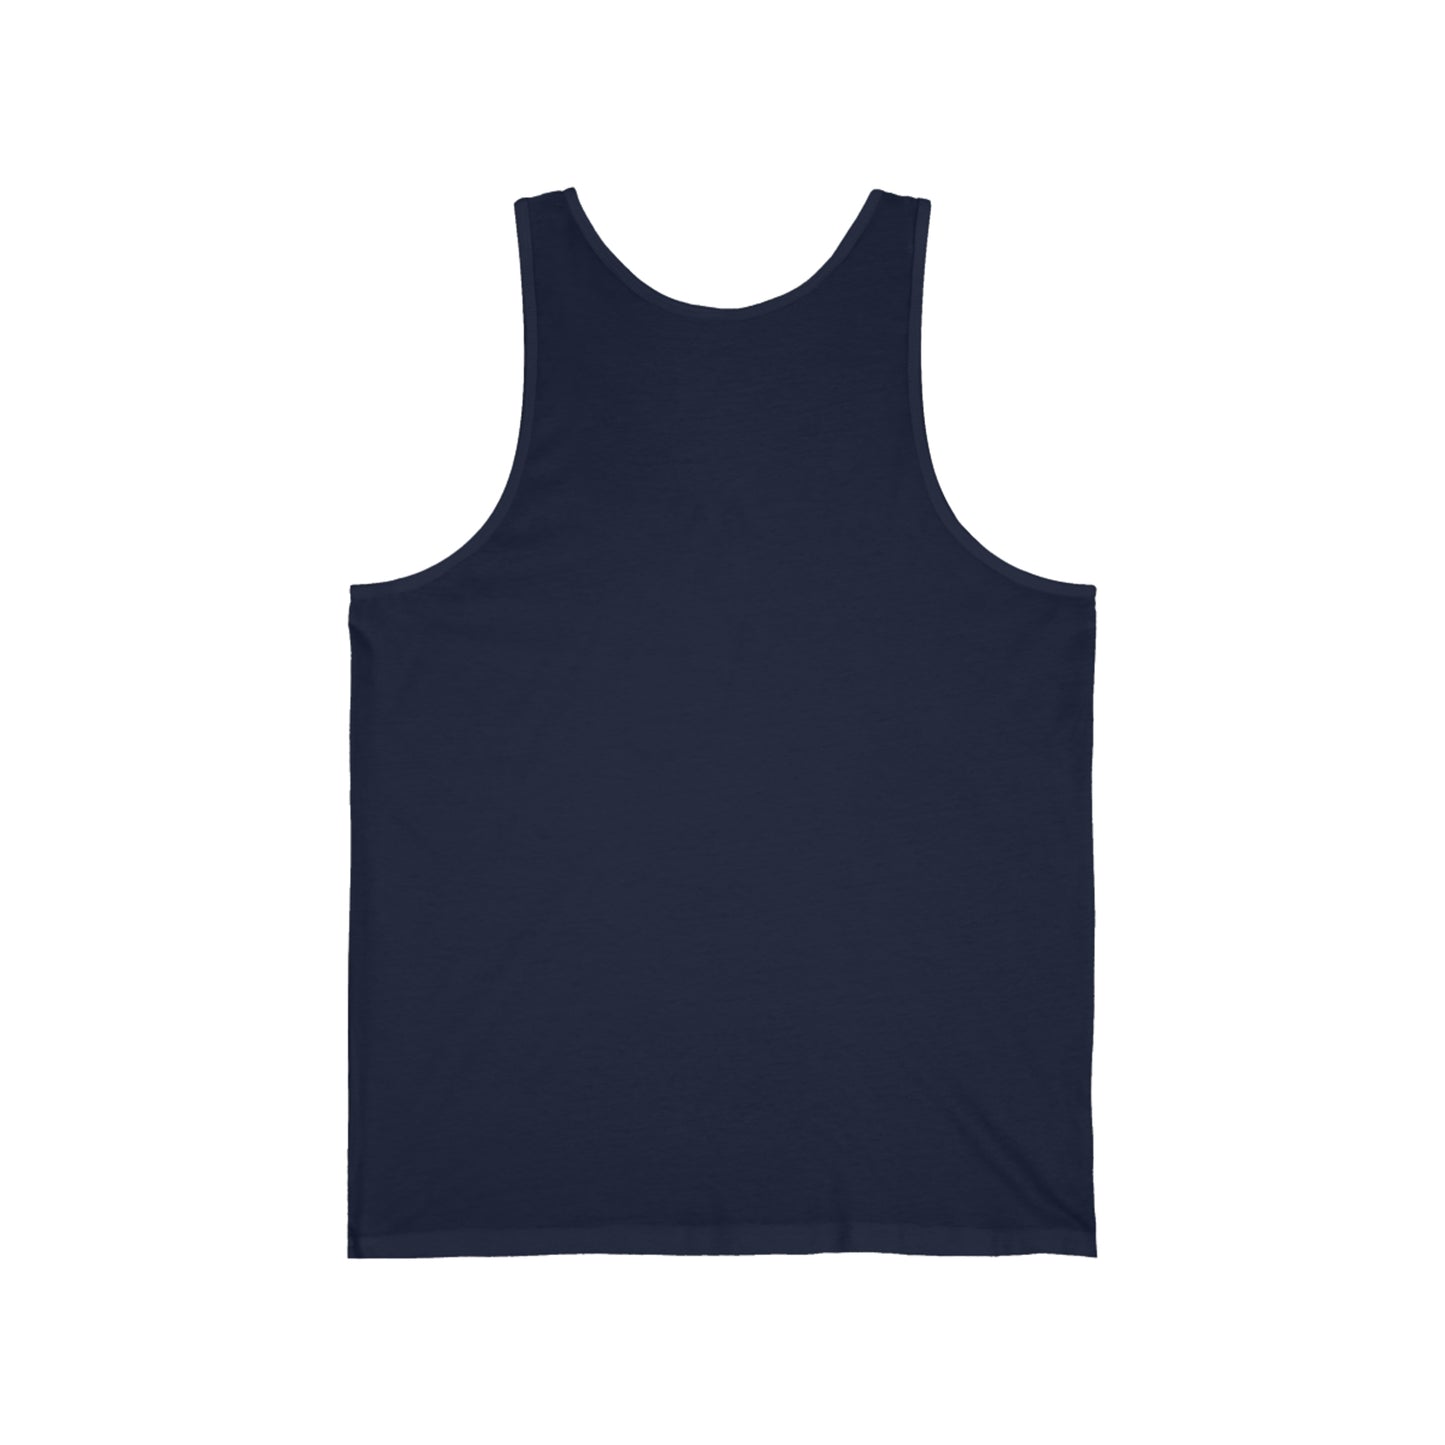 Japanese Roots Design 3: Tank Top